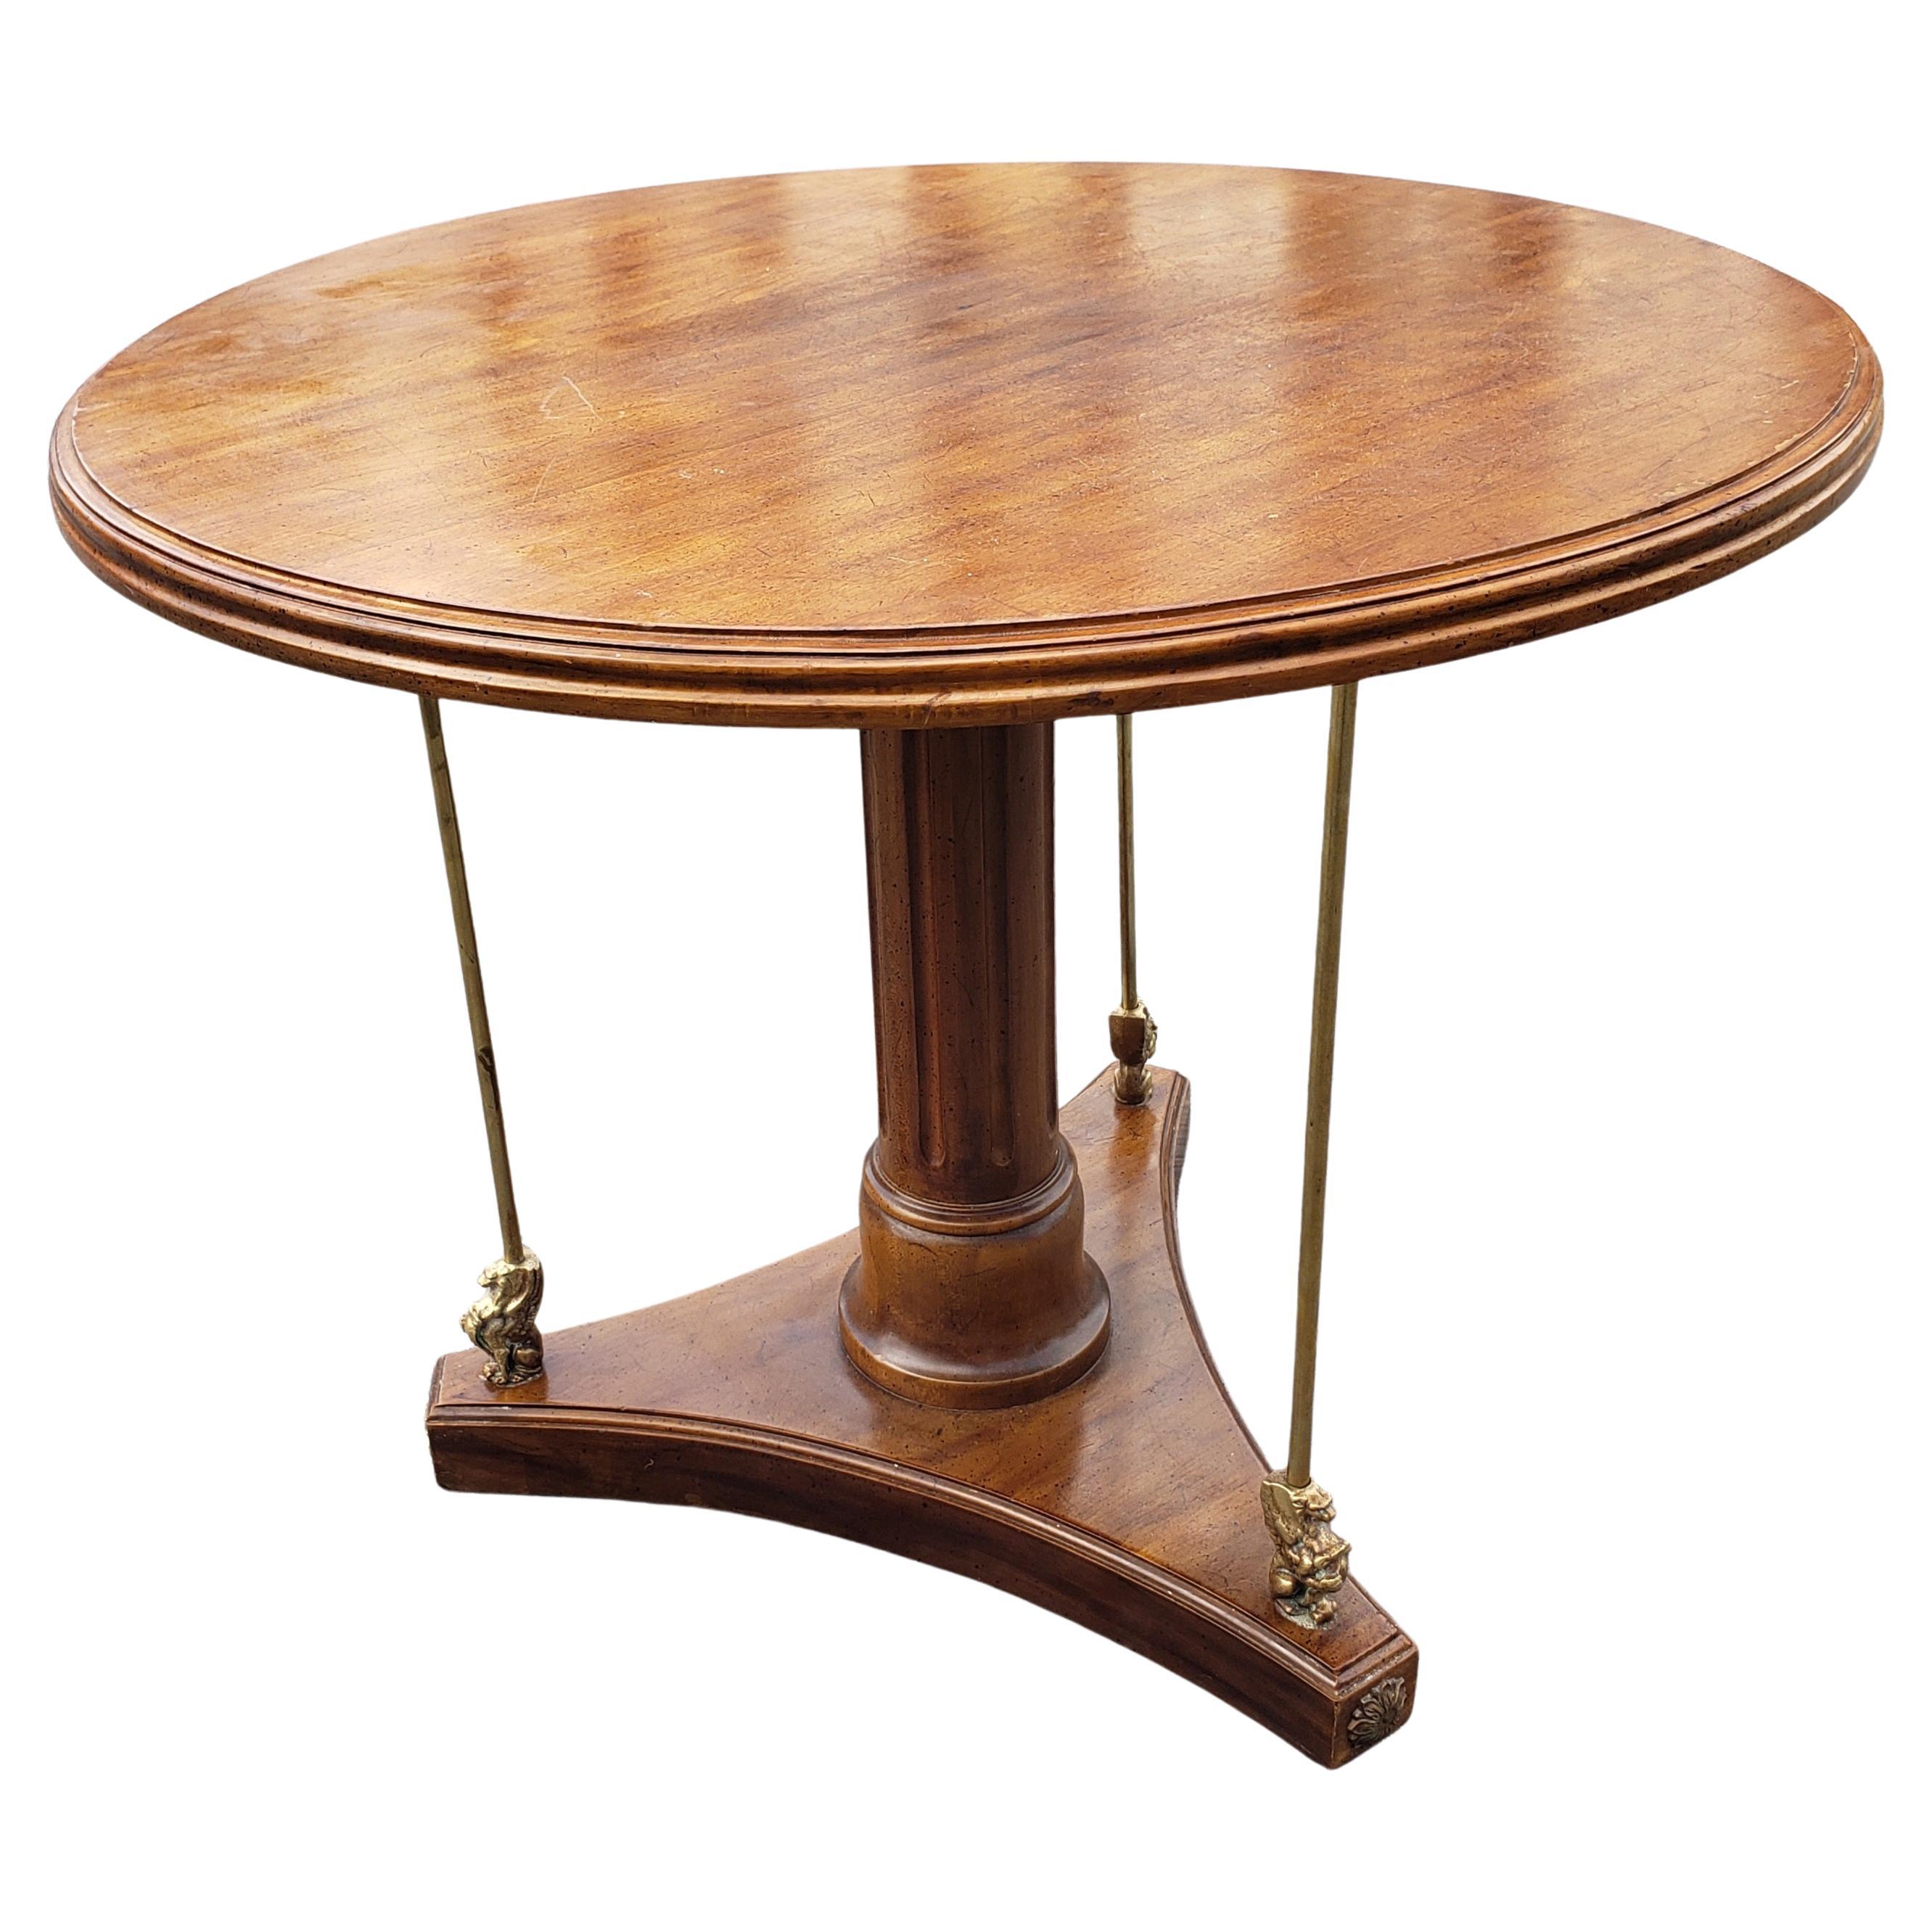 Charles X Style Calais Cherry & Brass Gueridon Pedestal Table by Davis Cabinet For Sale